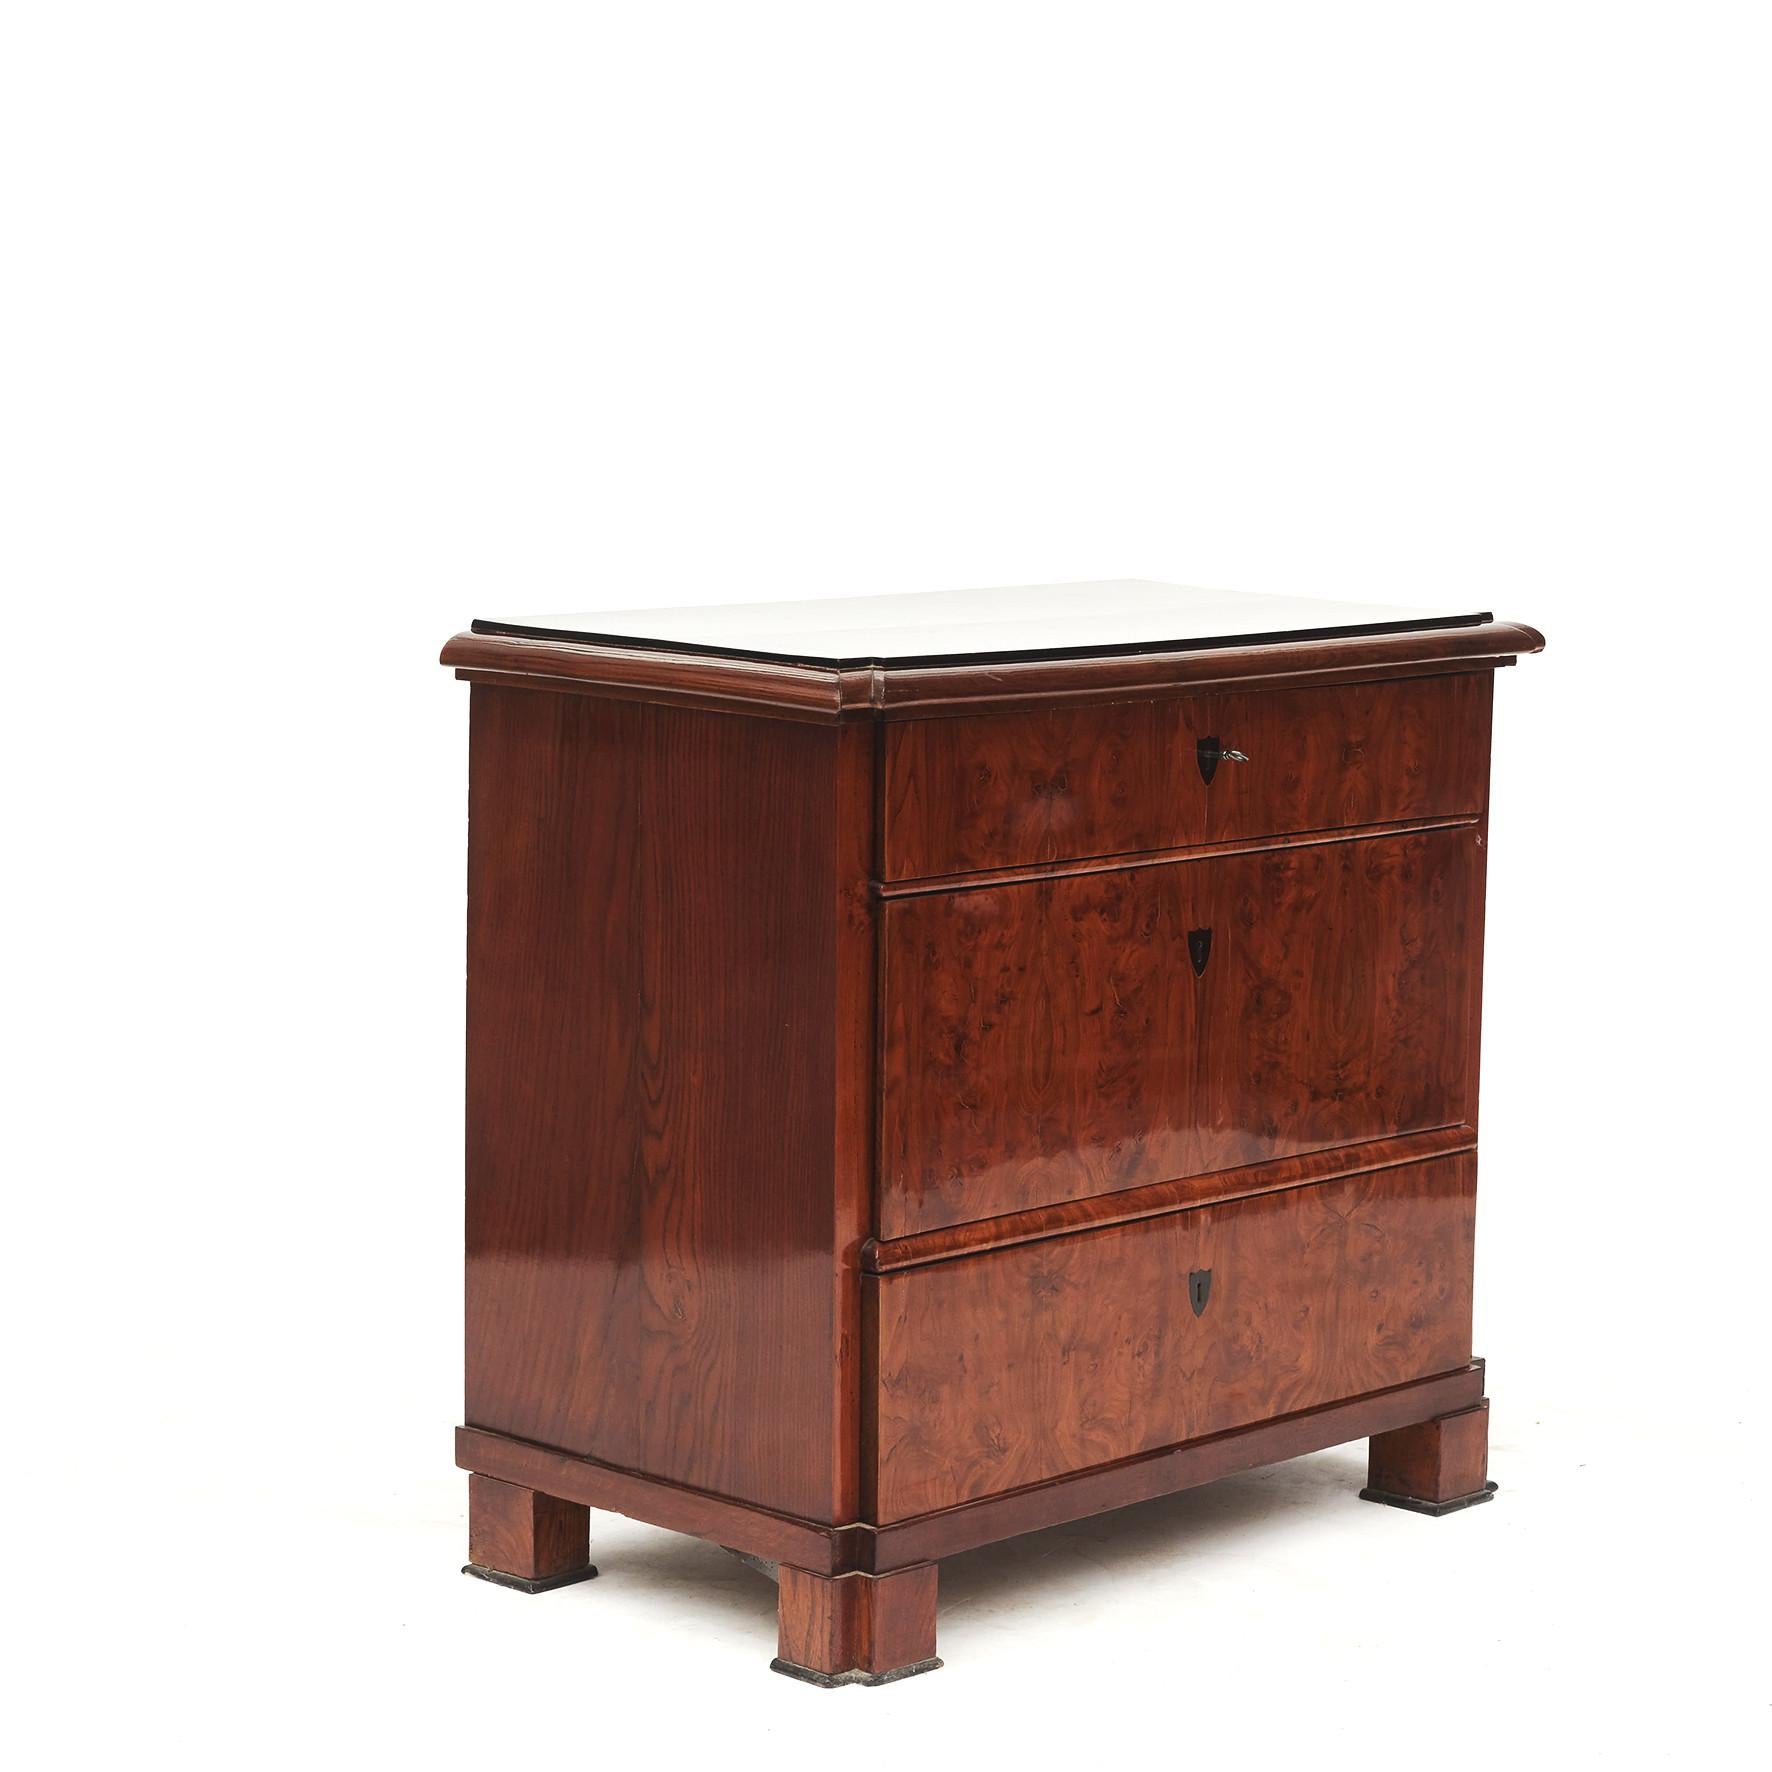 Danish biedermeier (also called late empire) chest of drawers.
Elm wood, front with mirrored elm veneer, sides in solid elm and ebonized top.
Denmark 1820-1830.